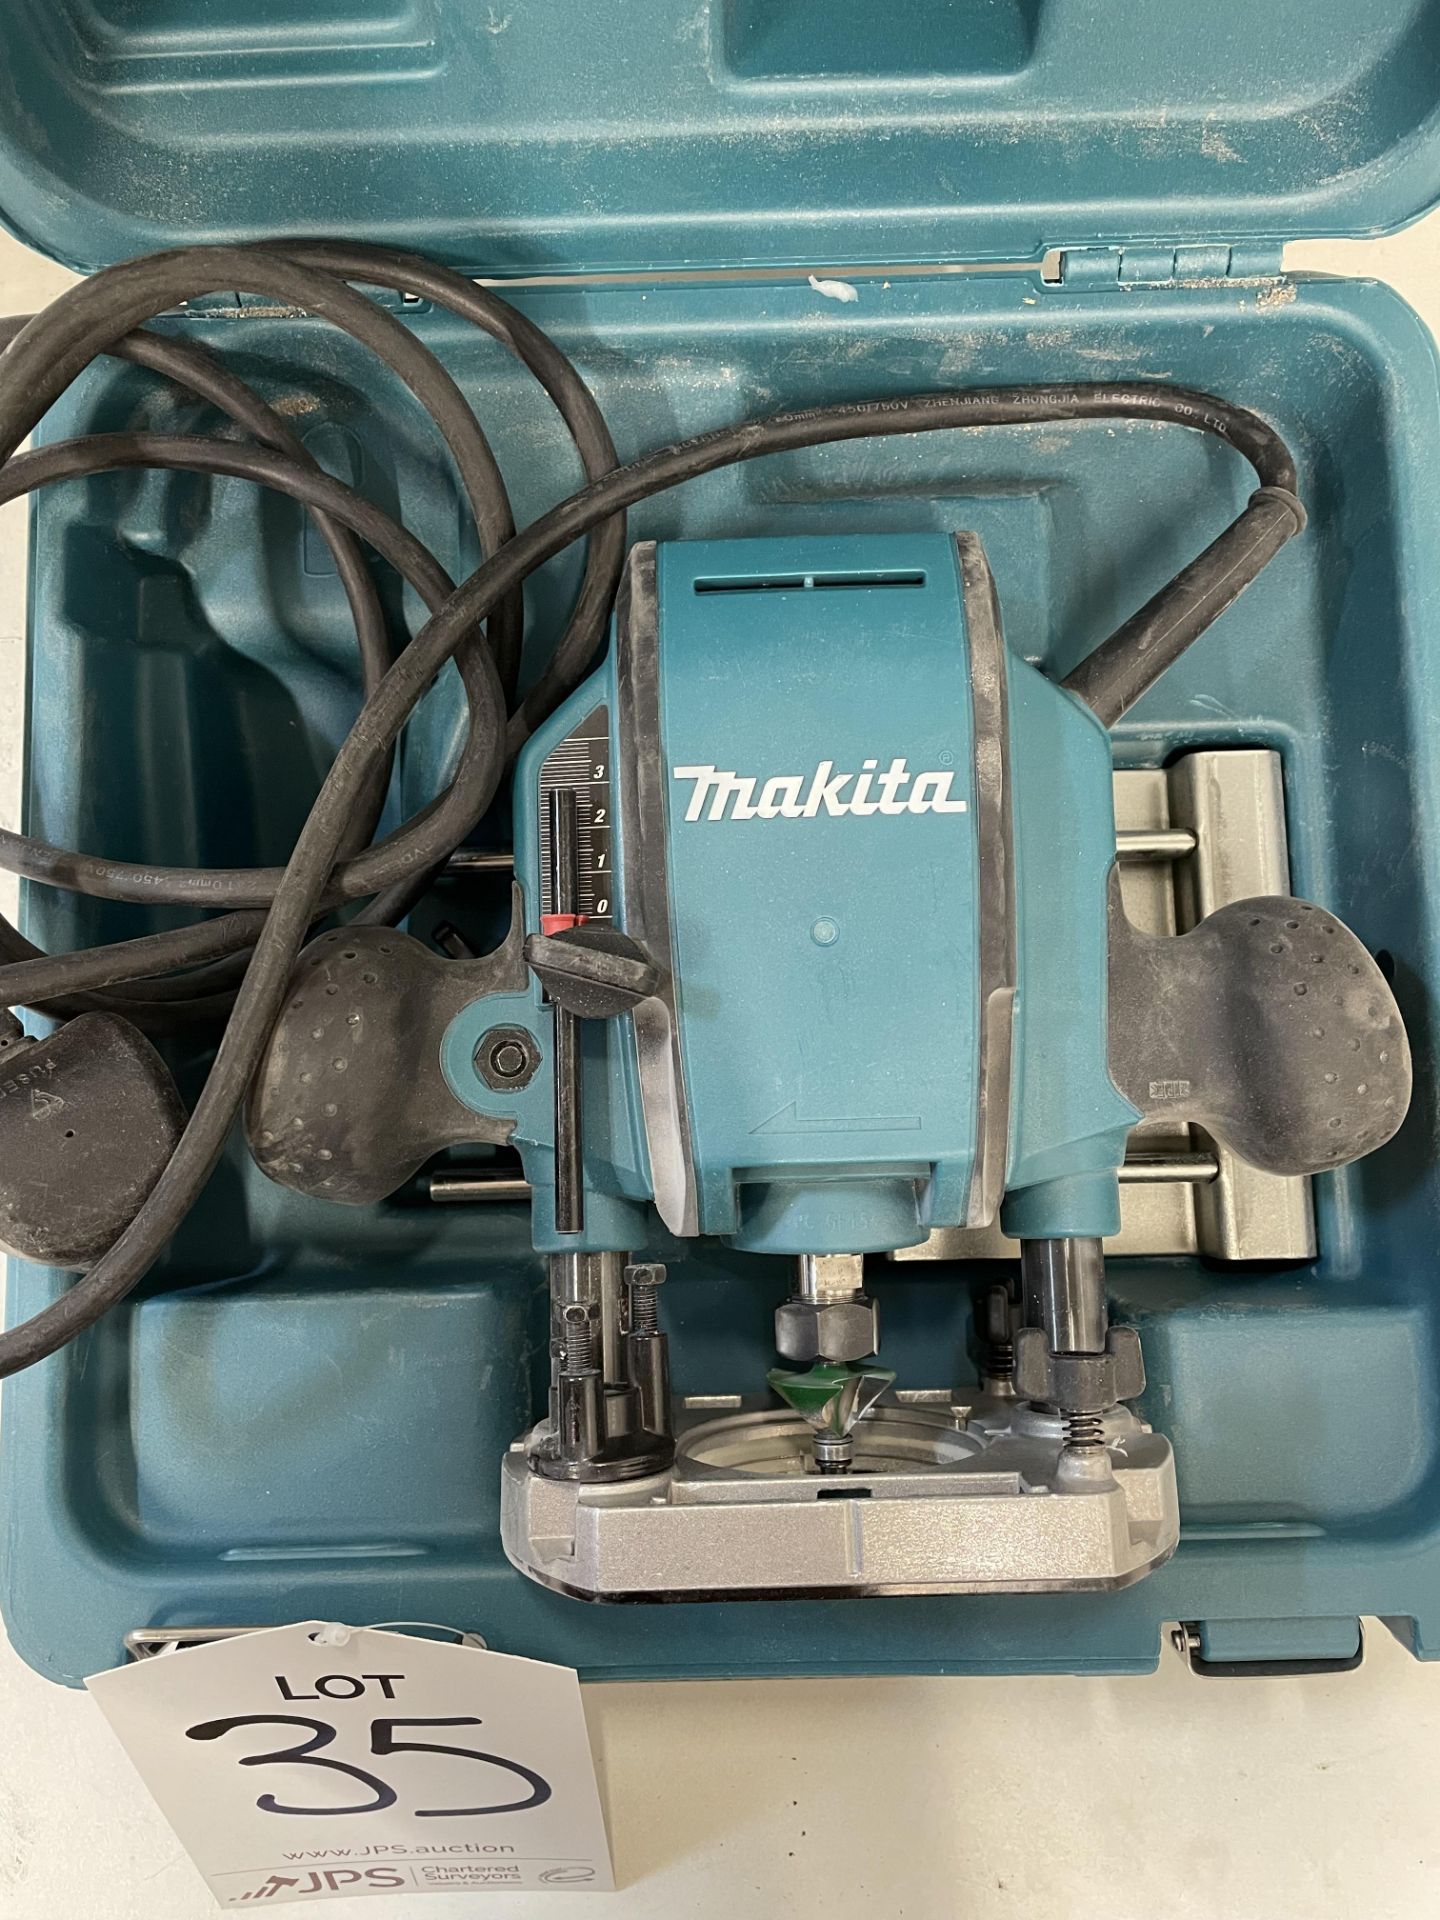 Makita RP0900 Electric Plunge Router 240V w/ Case - Image 3 of 6